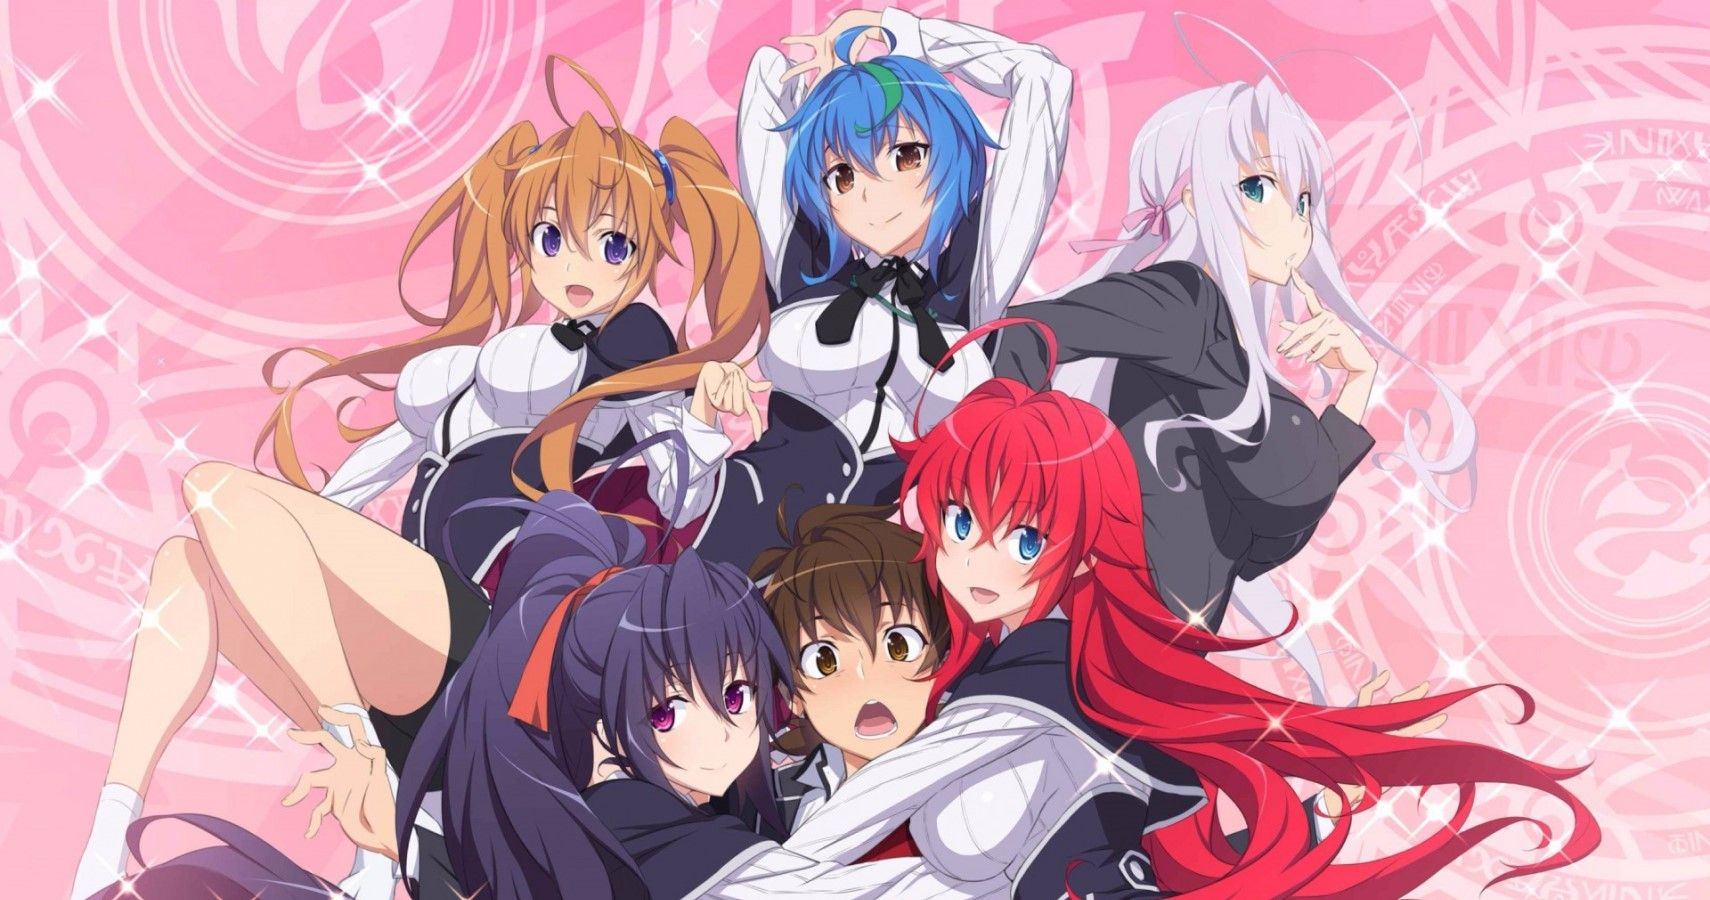 5 Recommendations for New Anime Harem 2022, from Fantasy - School